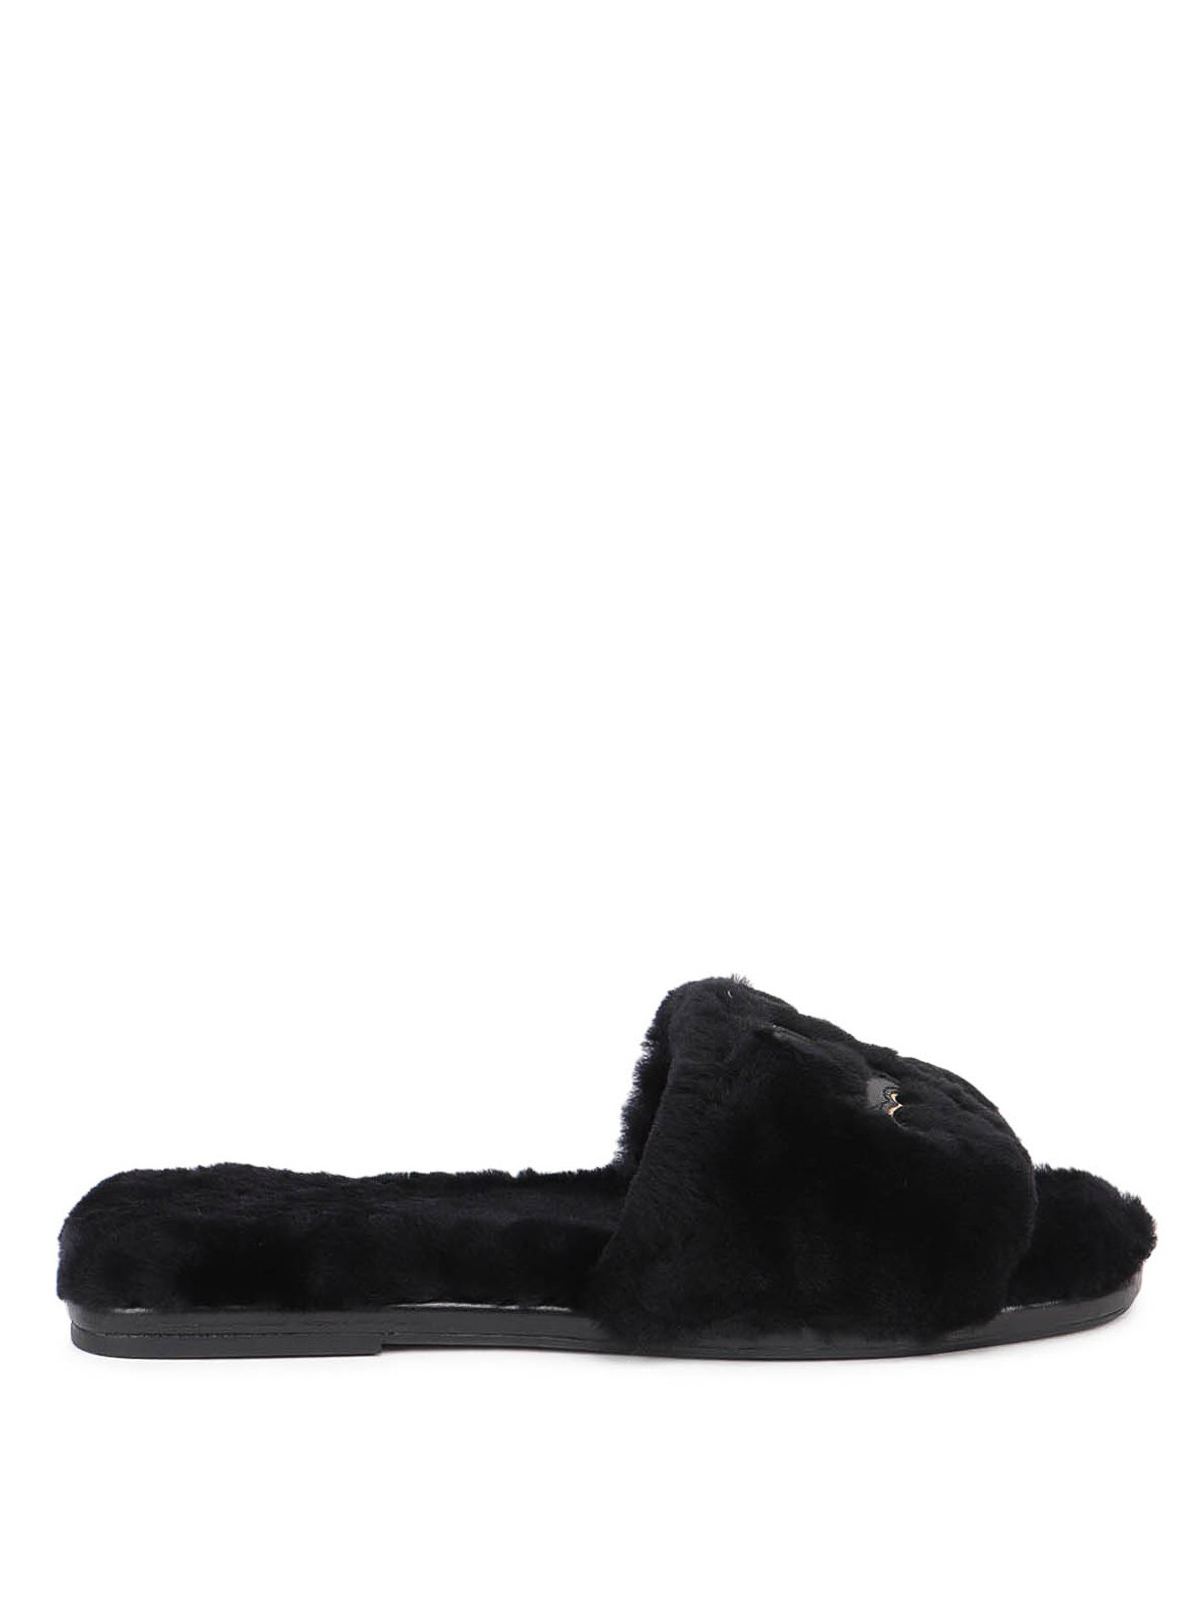 Sandals Tory Burch - Double T shearling slides - 83484001 